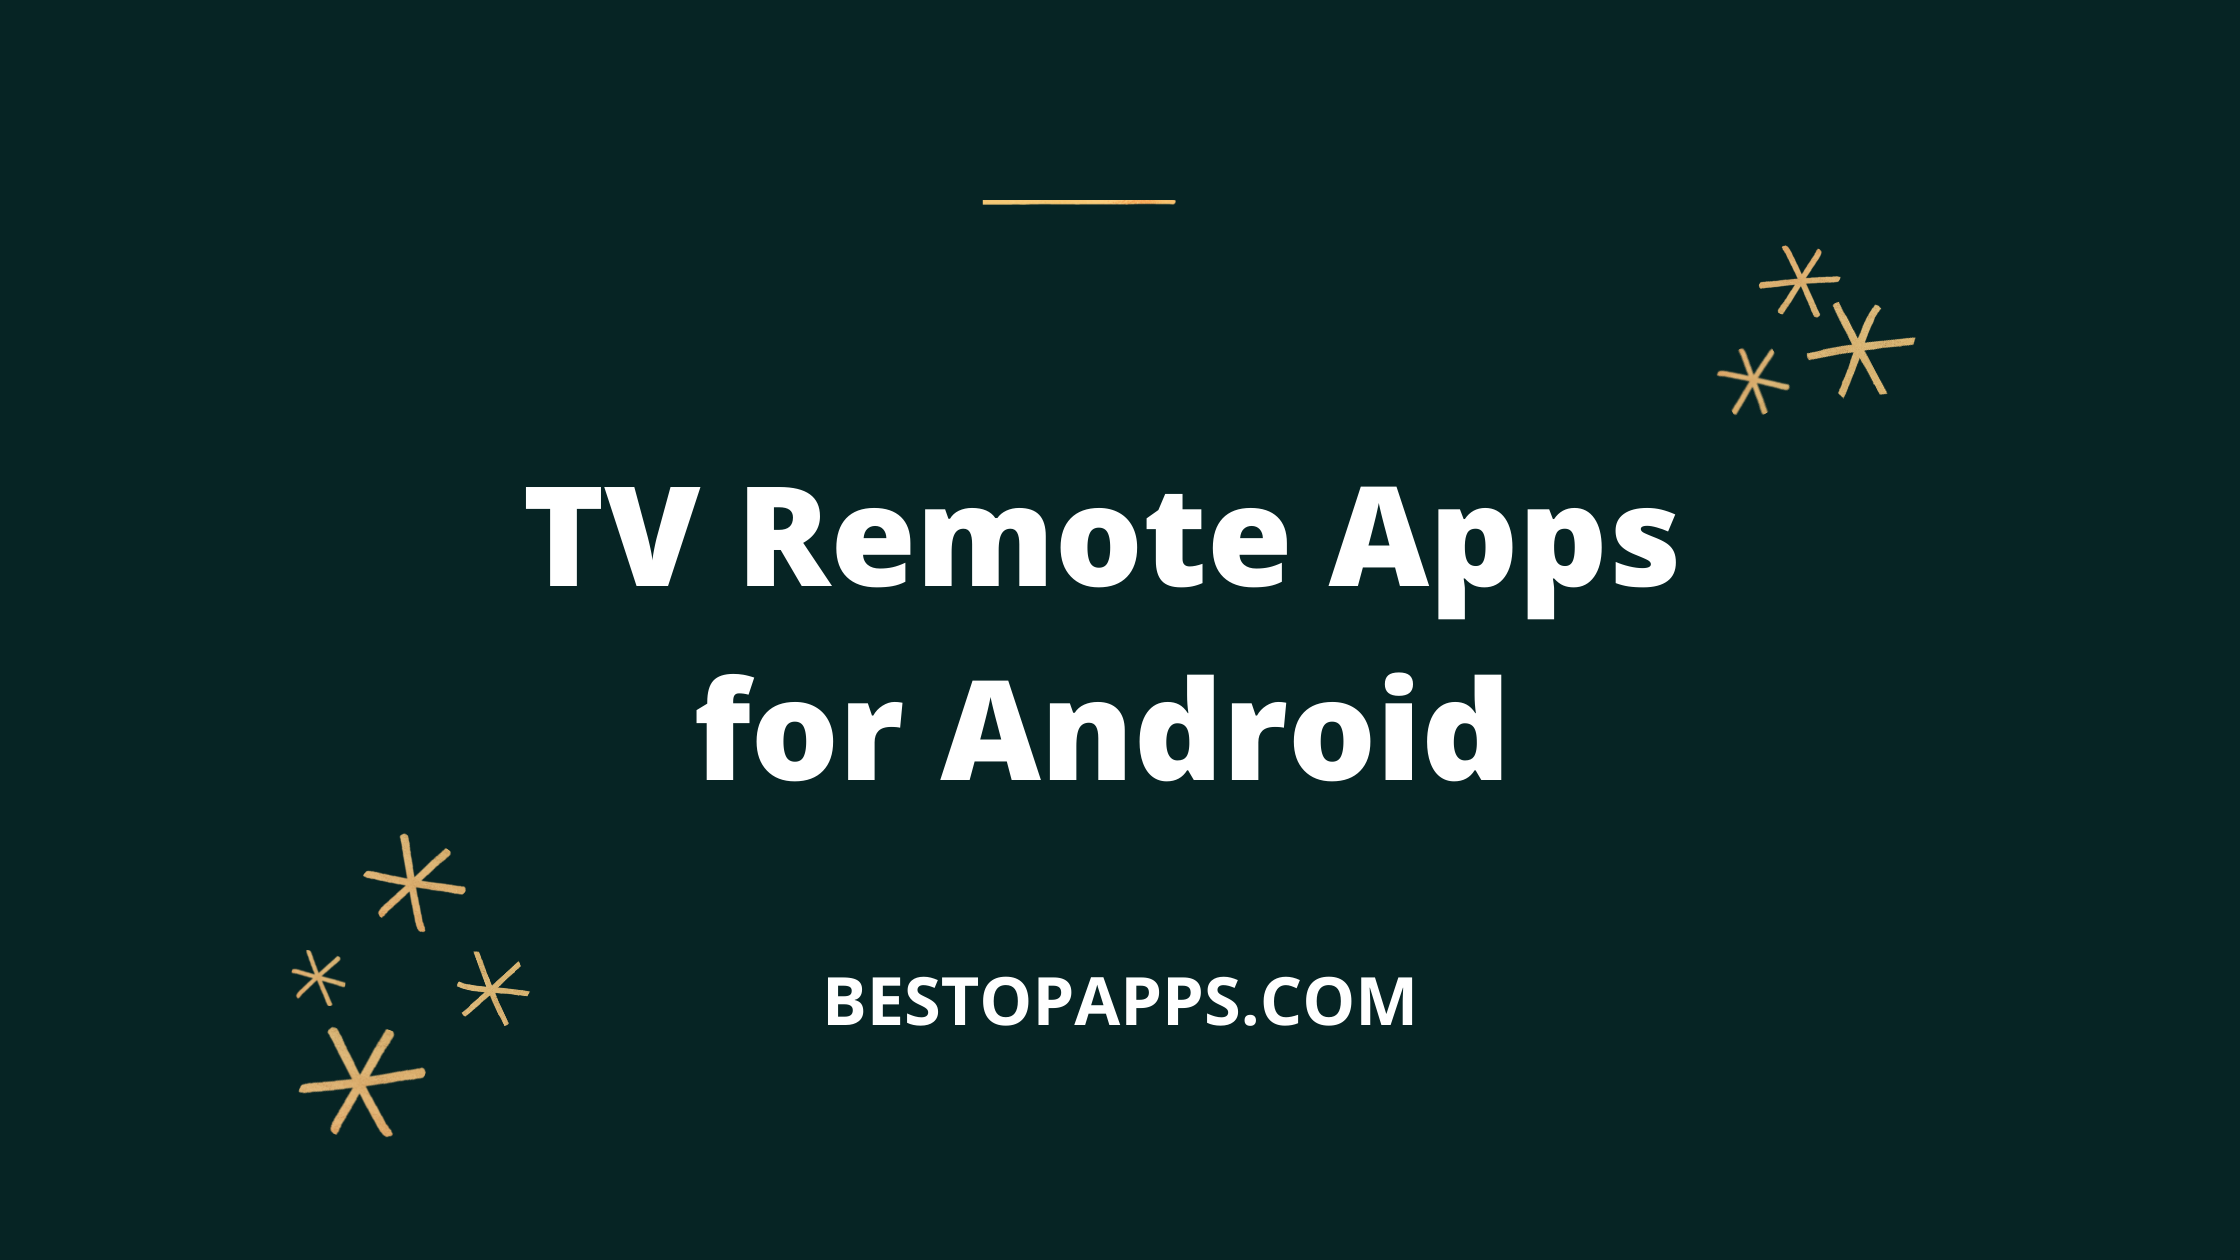 TV Remote Apps for Android